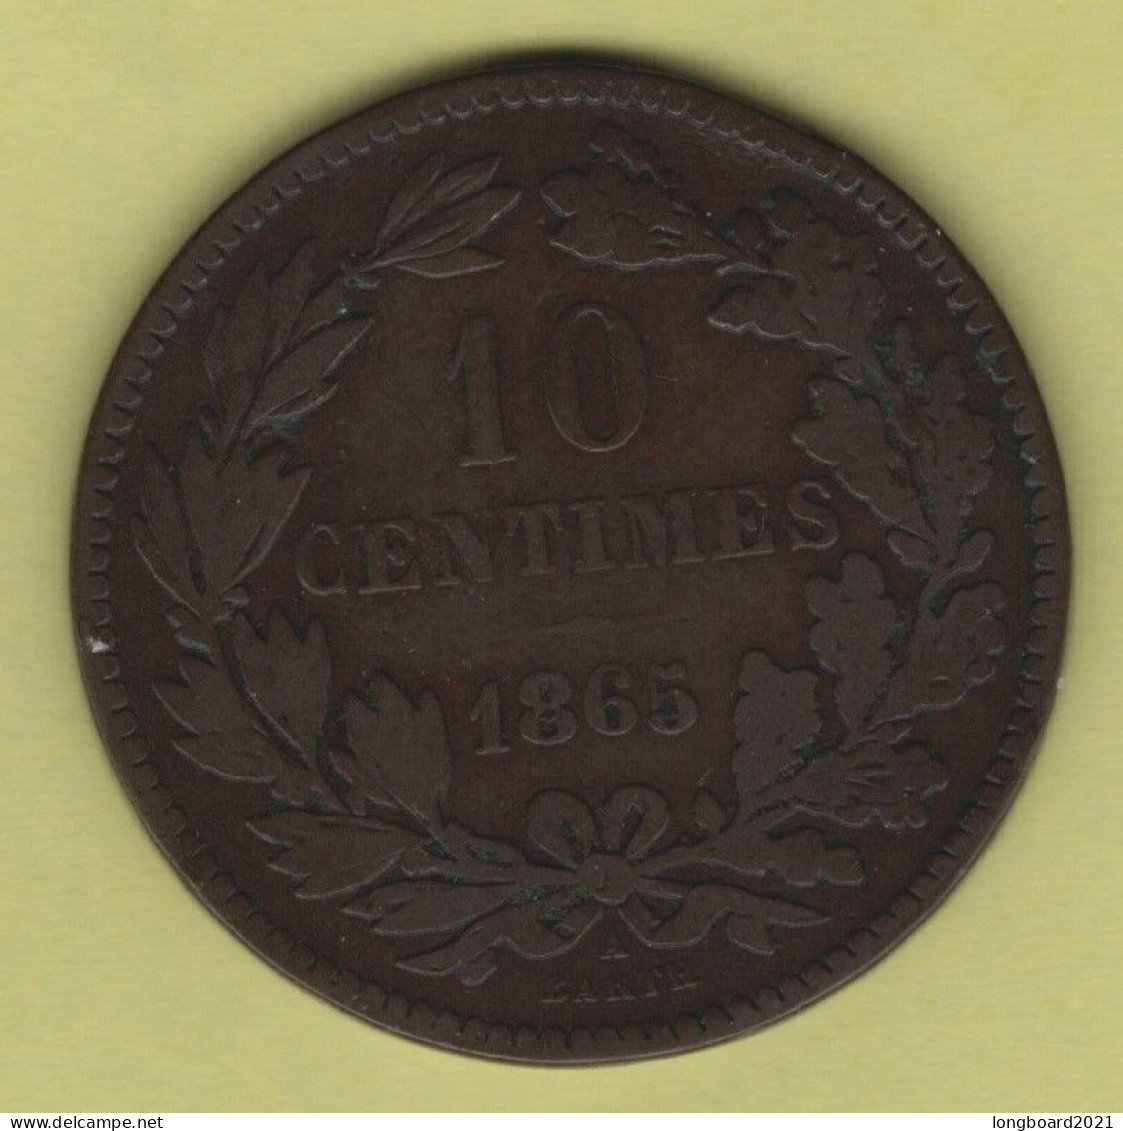 LUXEMBOURG - 10 CENTIMES 1865 - Luxembourg